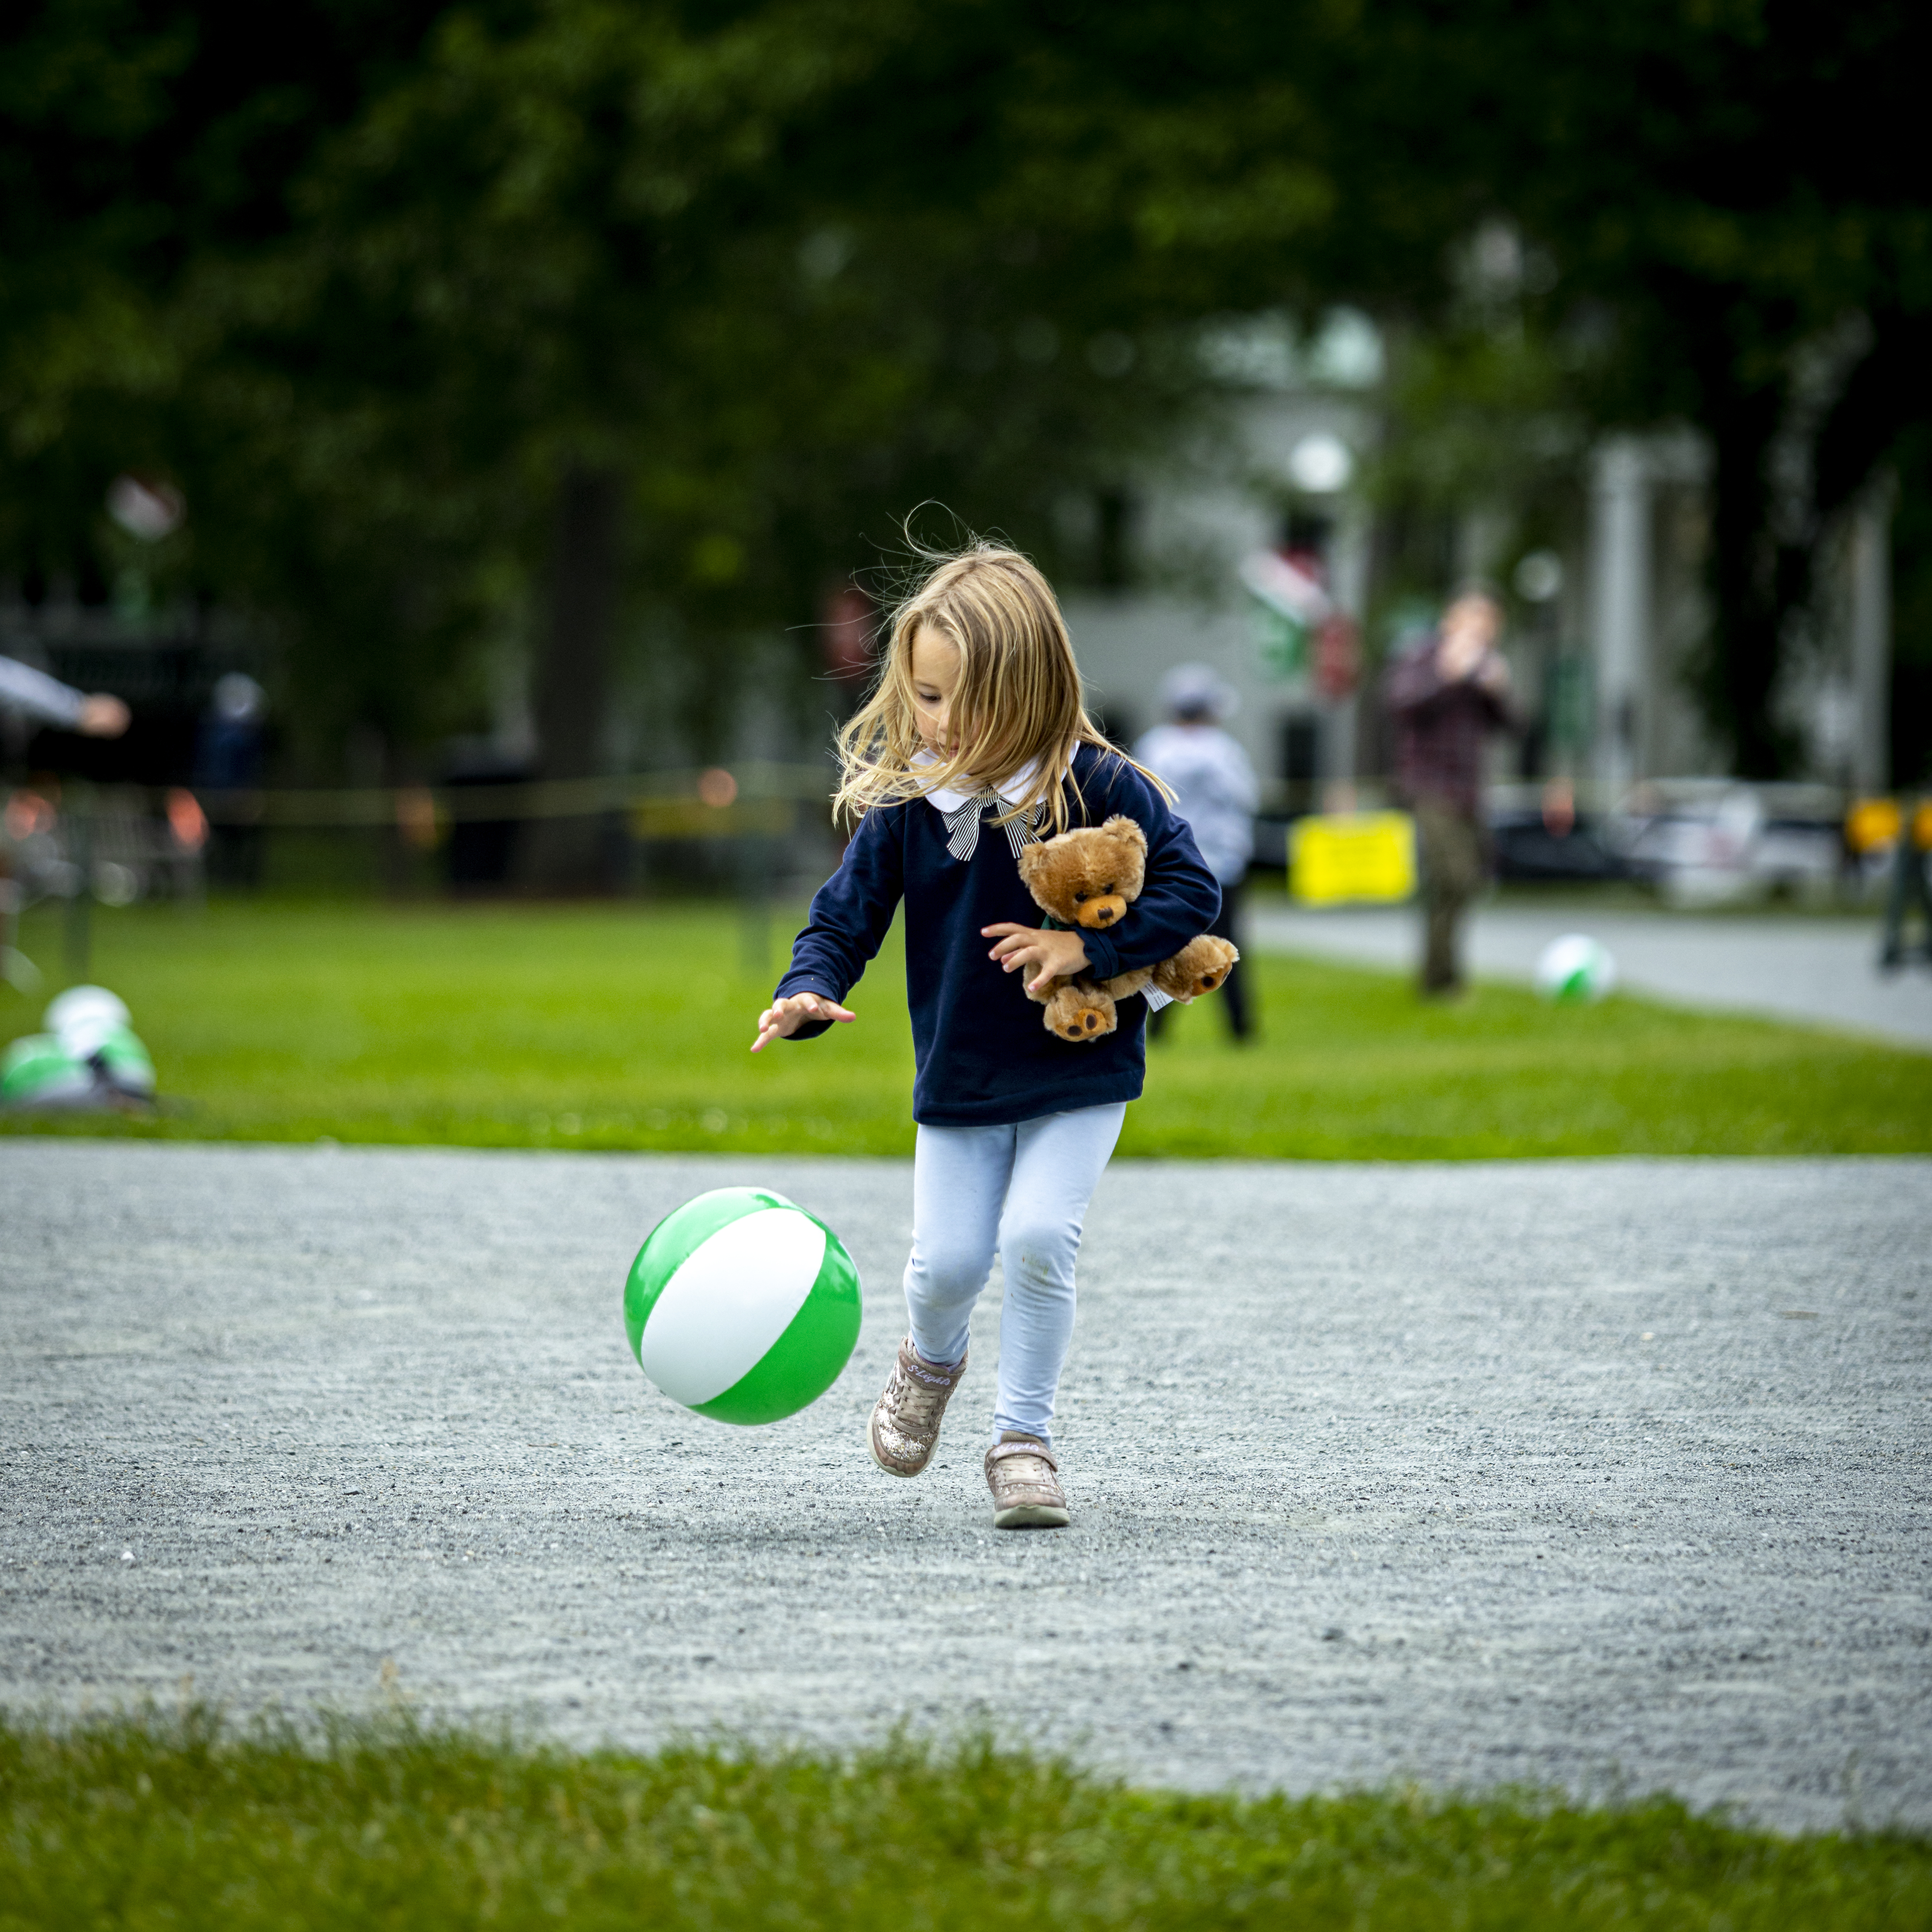 A toddler playing with a green and white ball on the Green